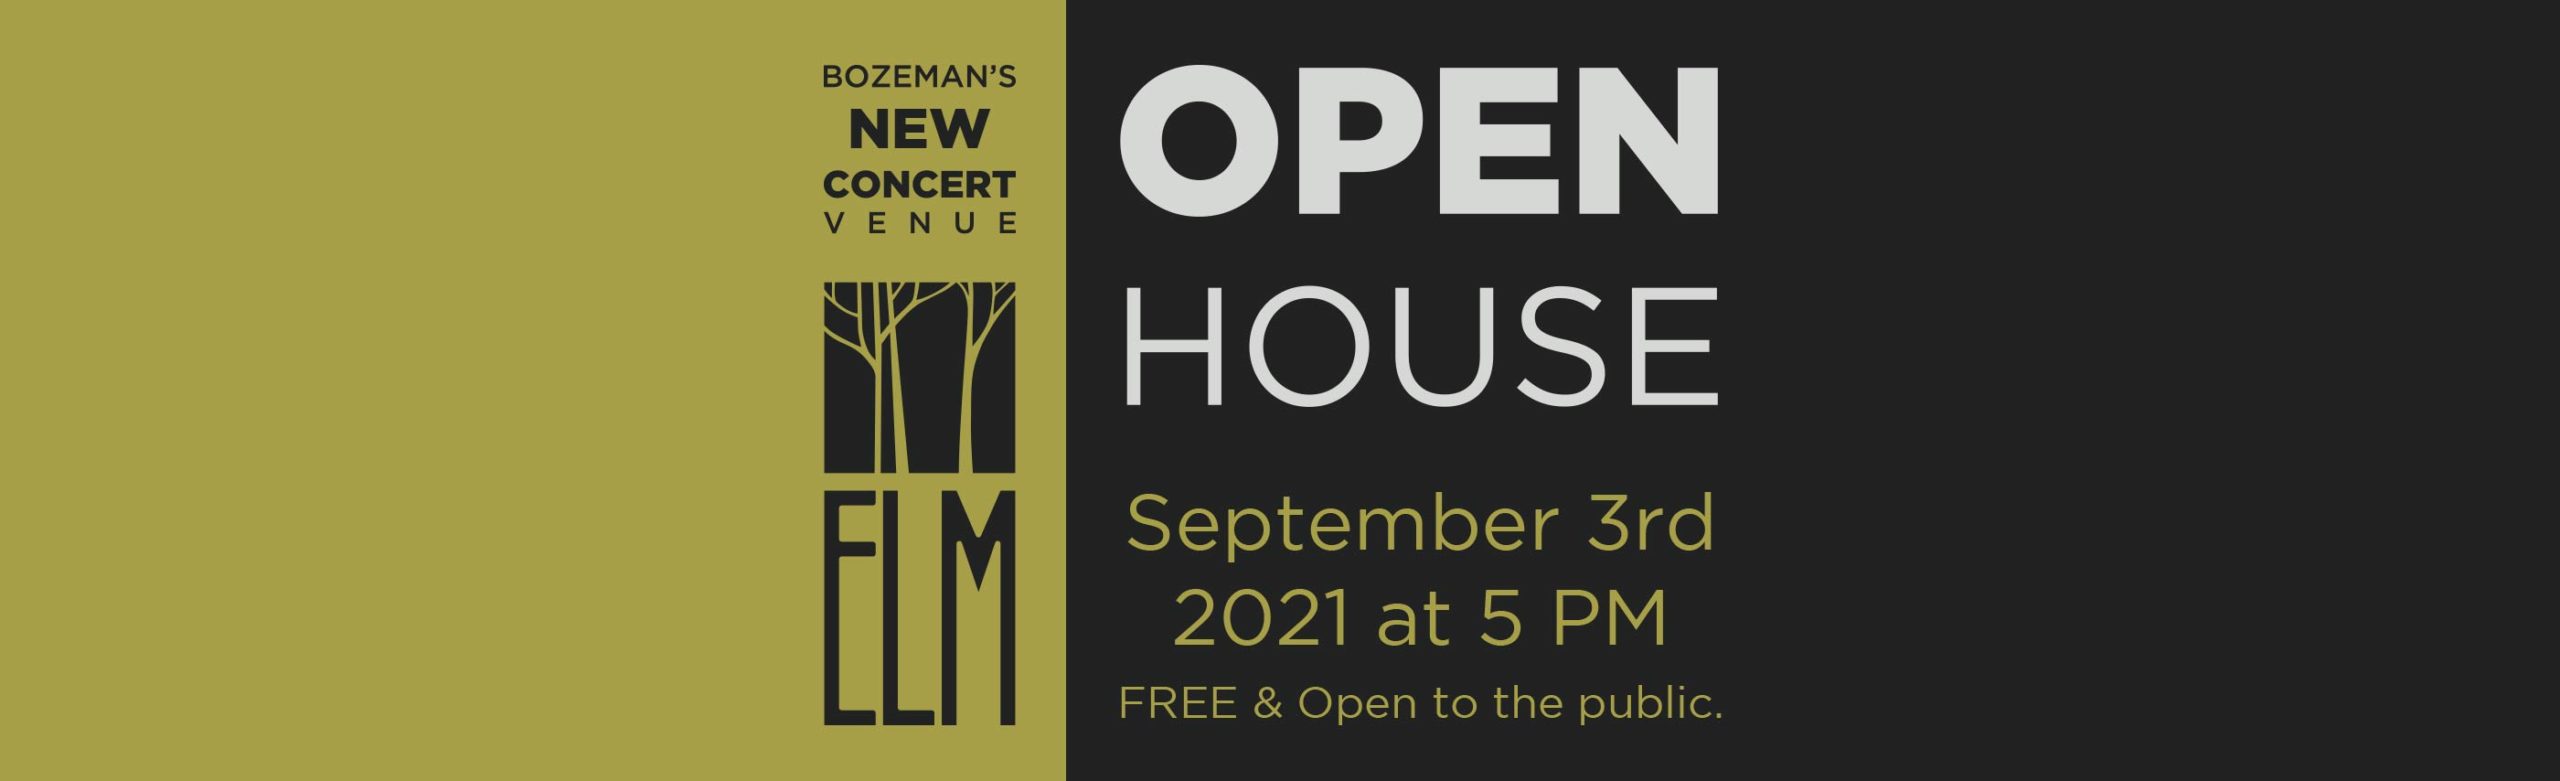 You’re Invited to The ELM’s Open House! Image